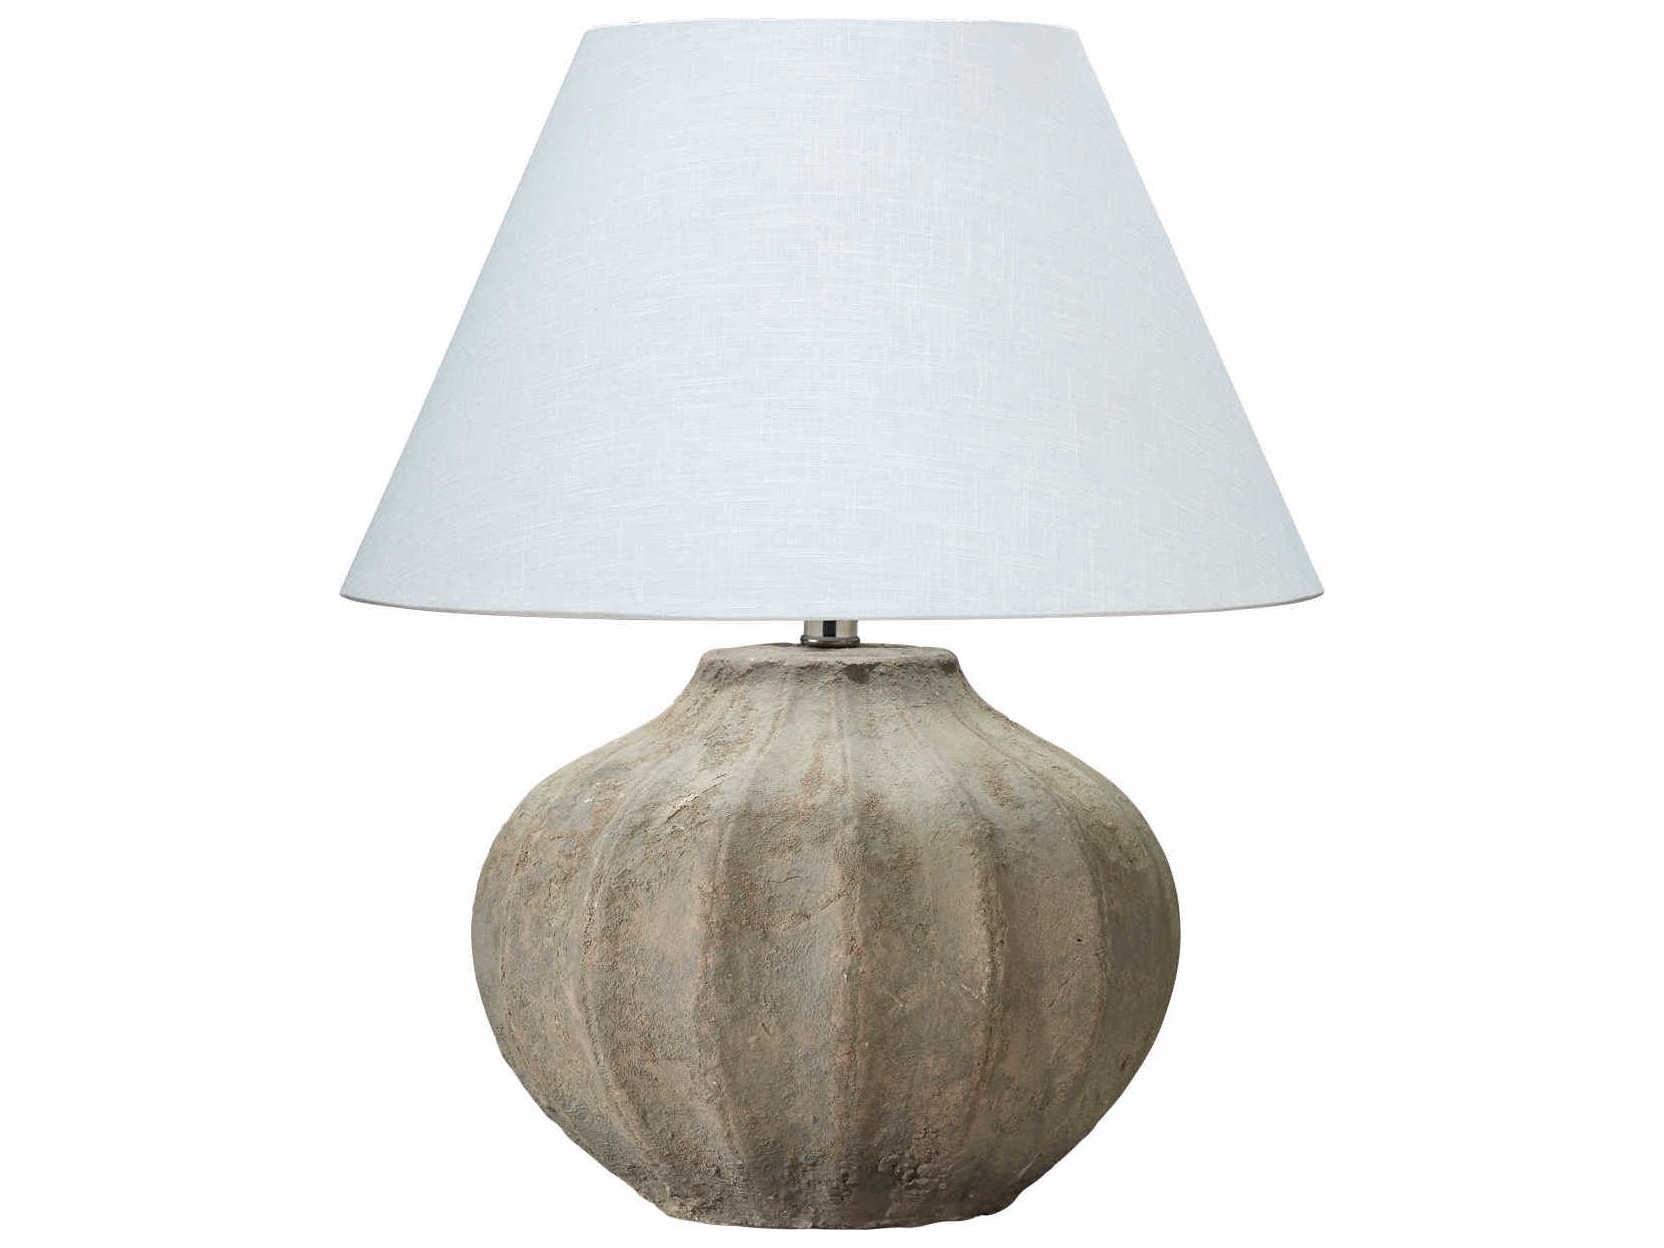 Jamie Young Company Sand One Light, Jamie Young Table Lamps